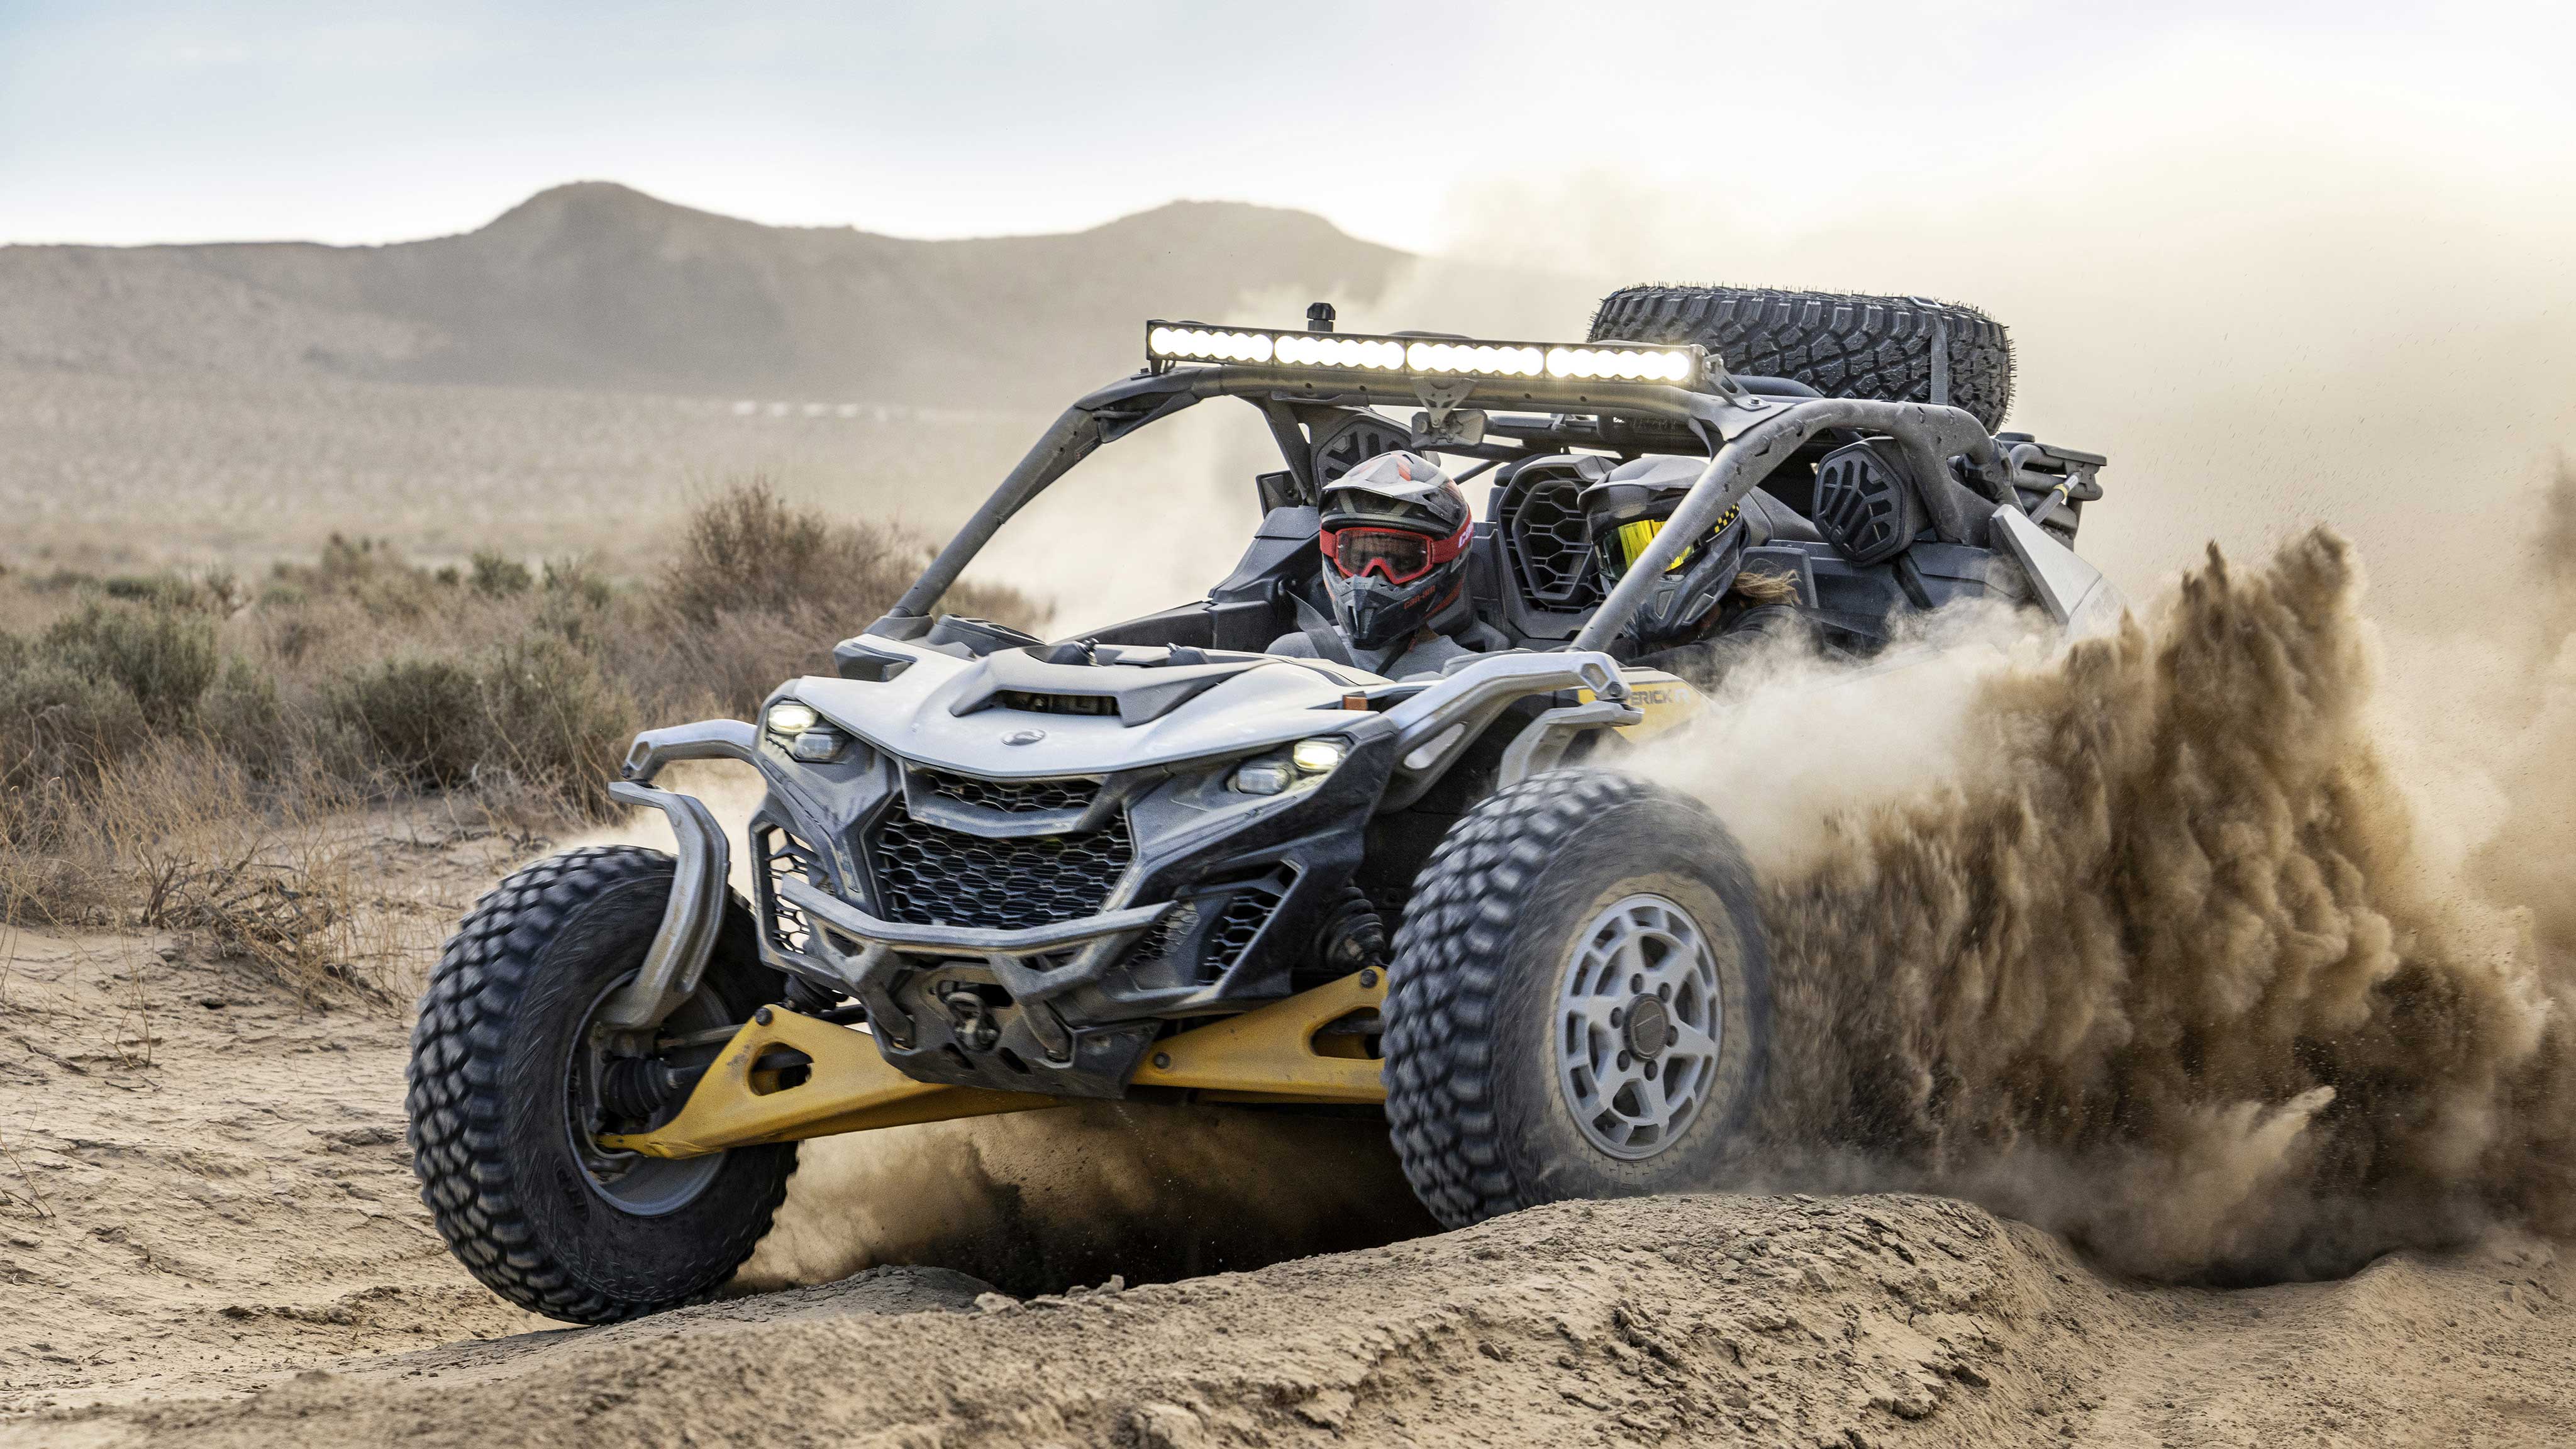 Testing the suspensions of the Can-Am Maverick R in the desert